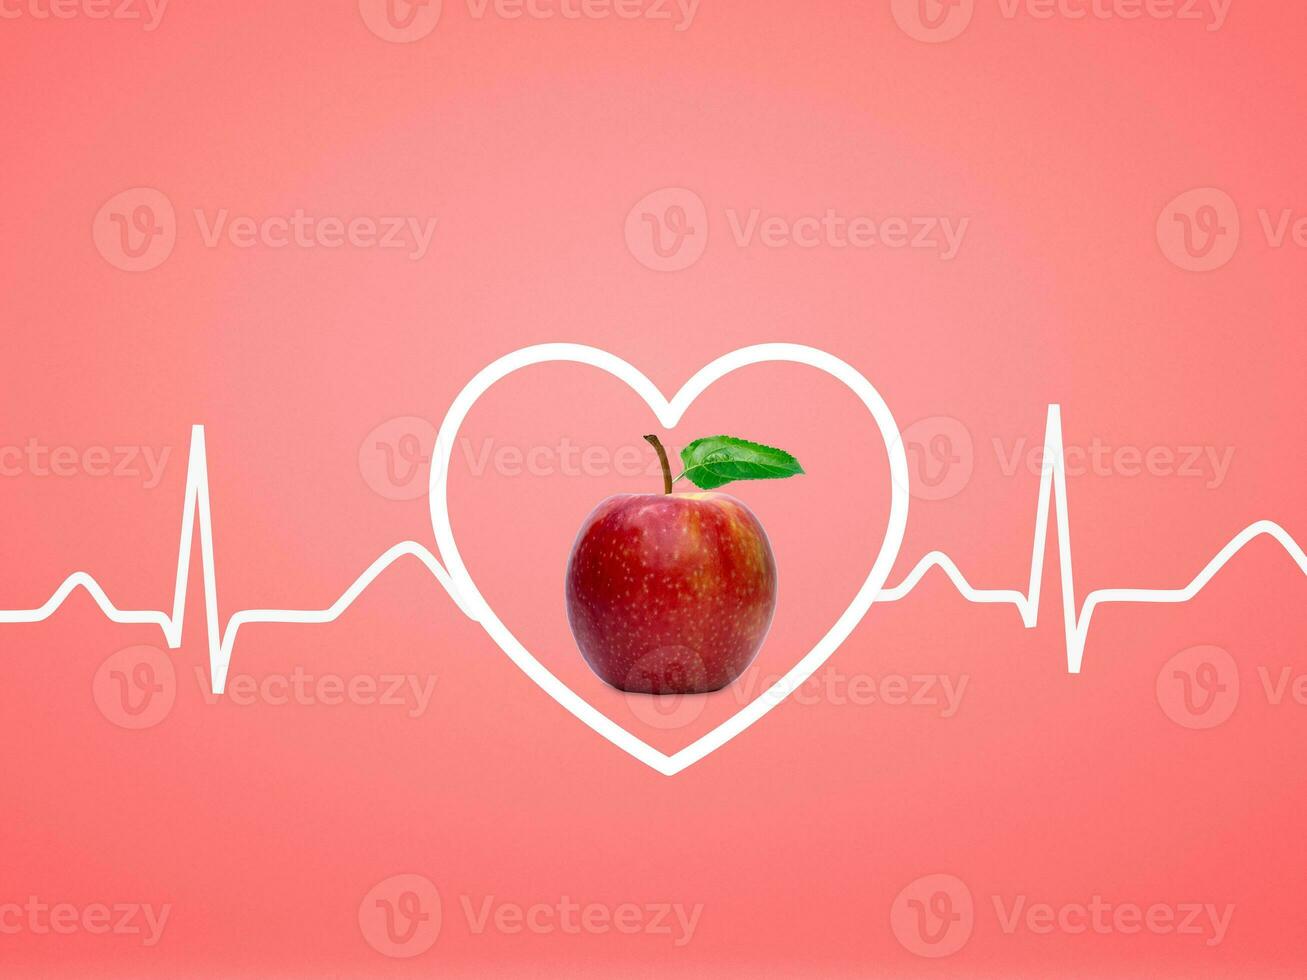 Heartbeat line on red apple photo